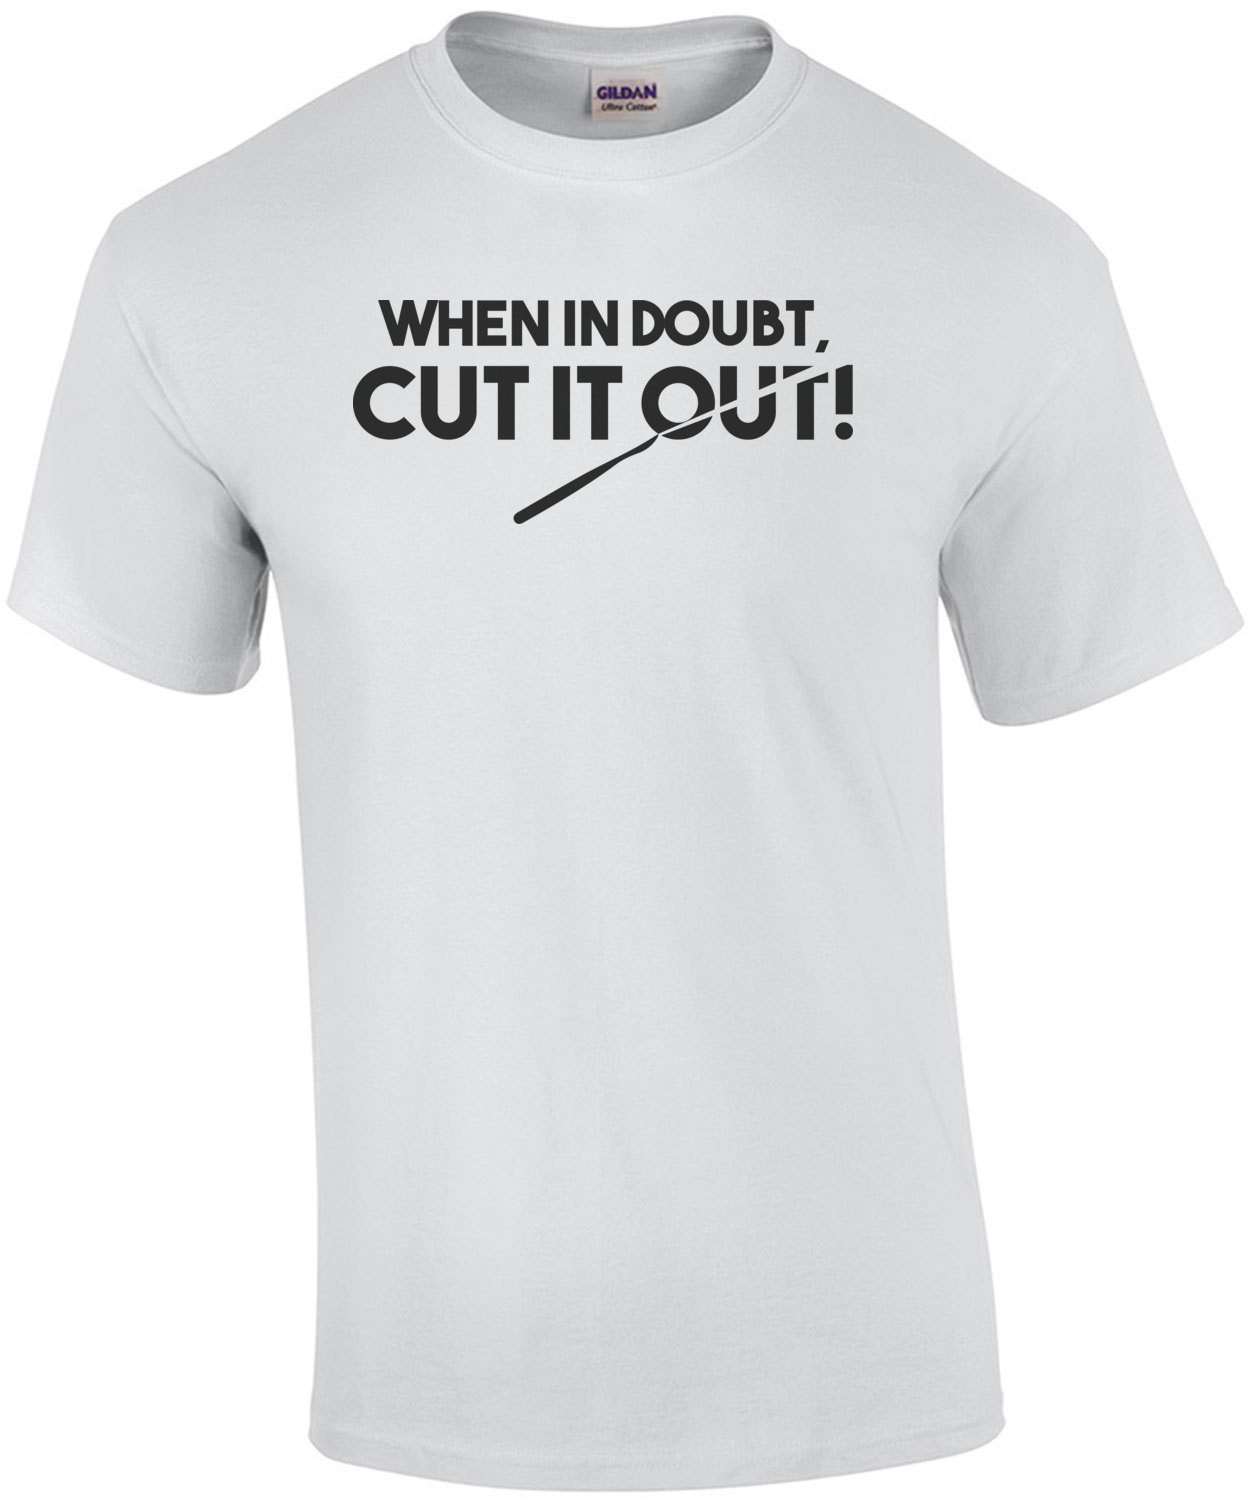 When in doubt, cut it out. funny Surgeon / surgery T-Shirt